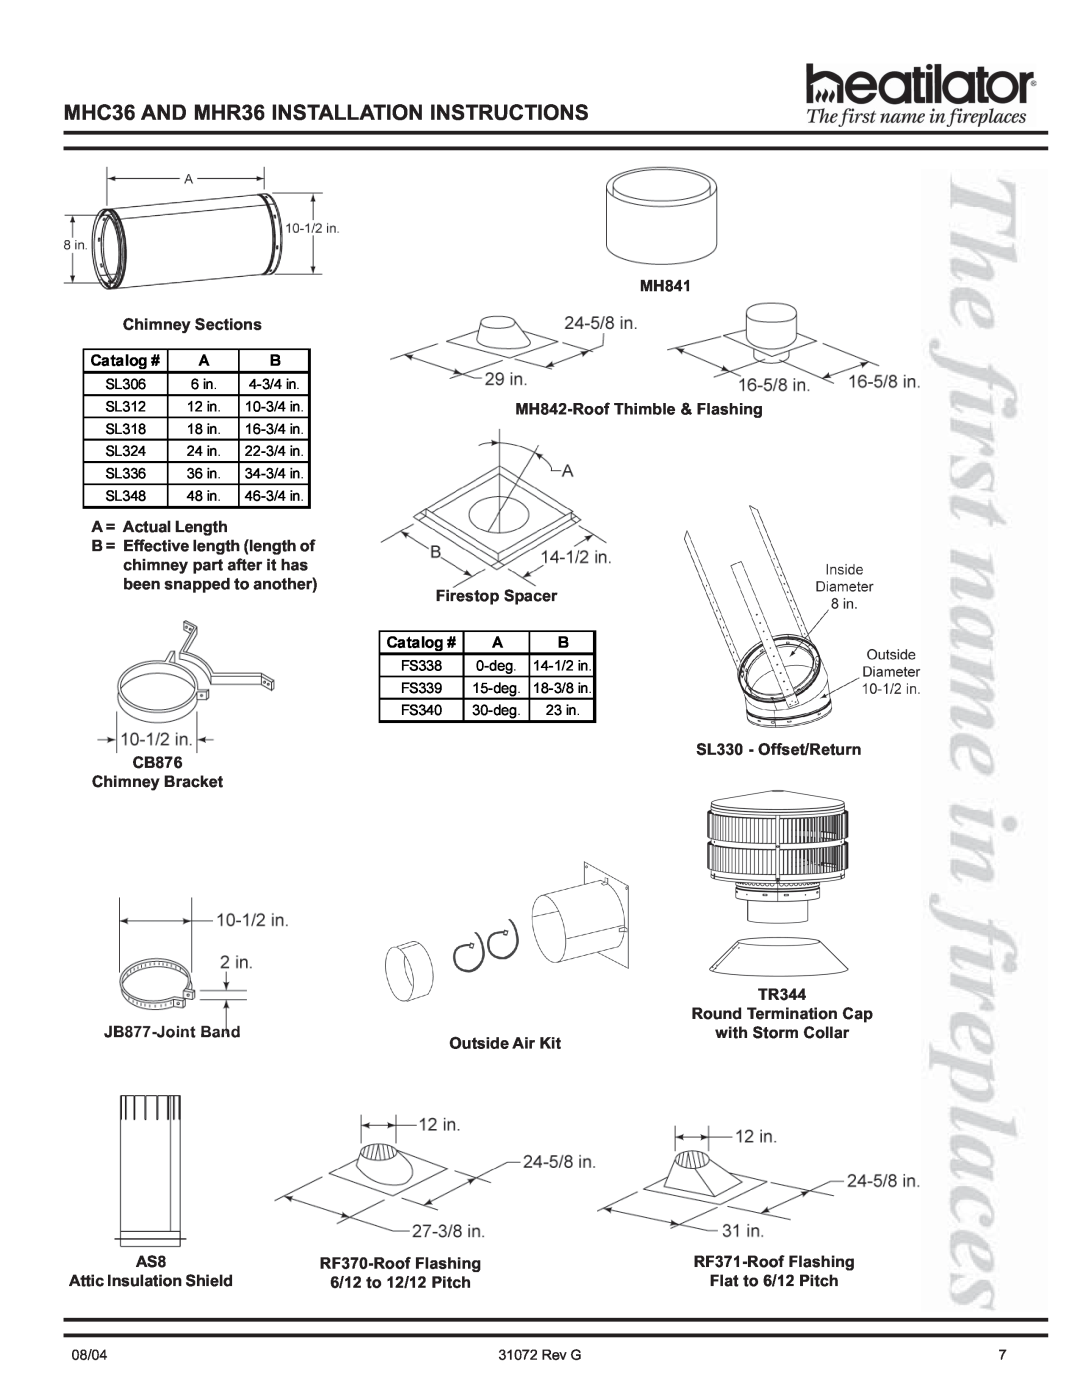 Heart & Home Collectables manual MHC36 AND MHR36 INSTALLATION INSTRUCTIONS, MH841 Chimney Sections 